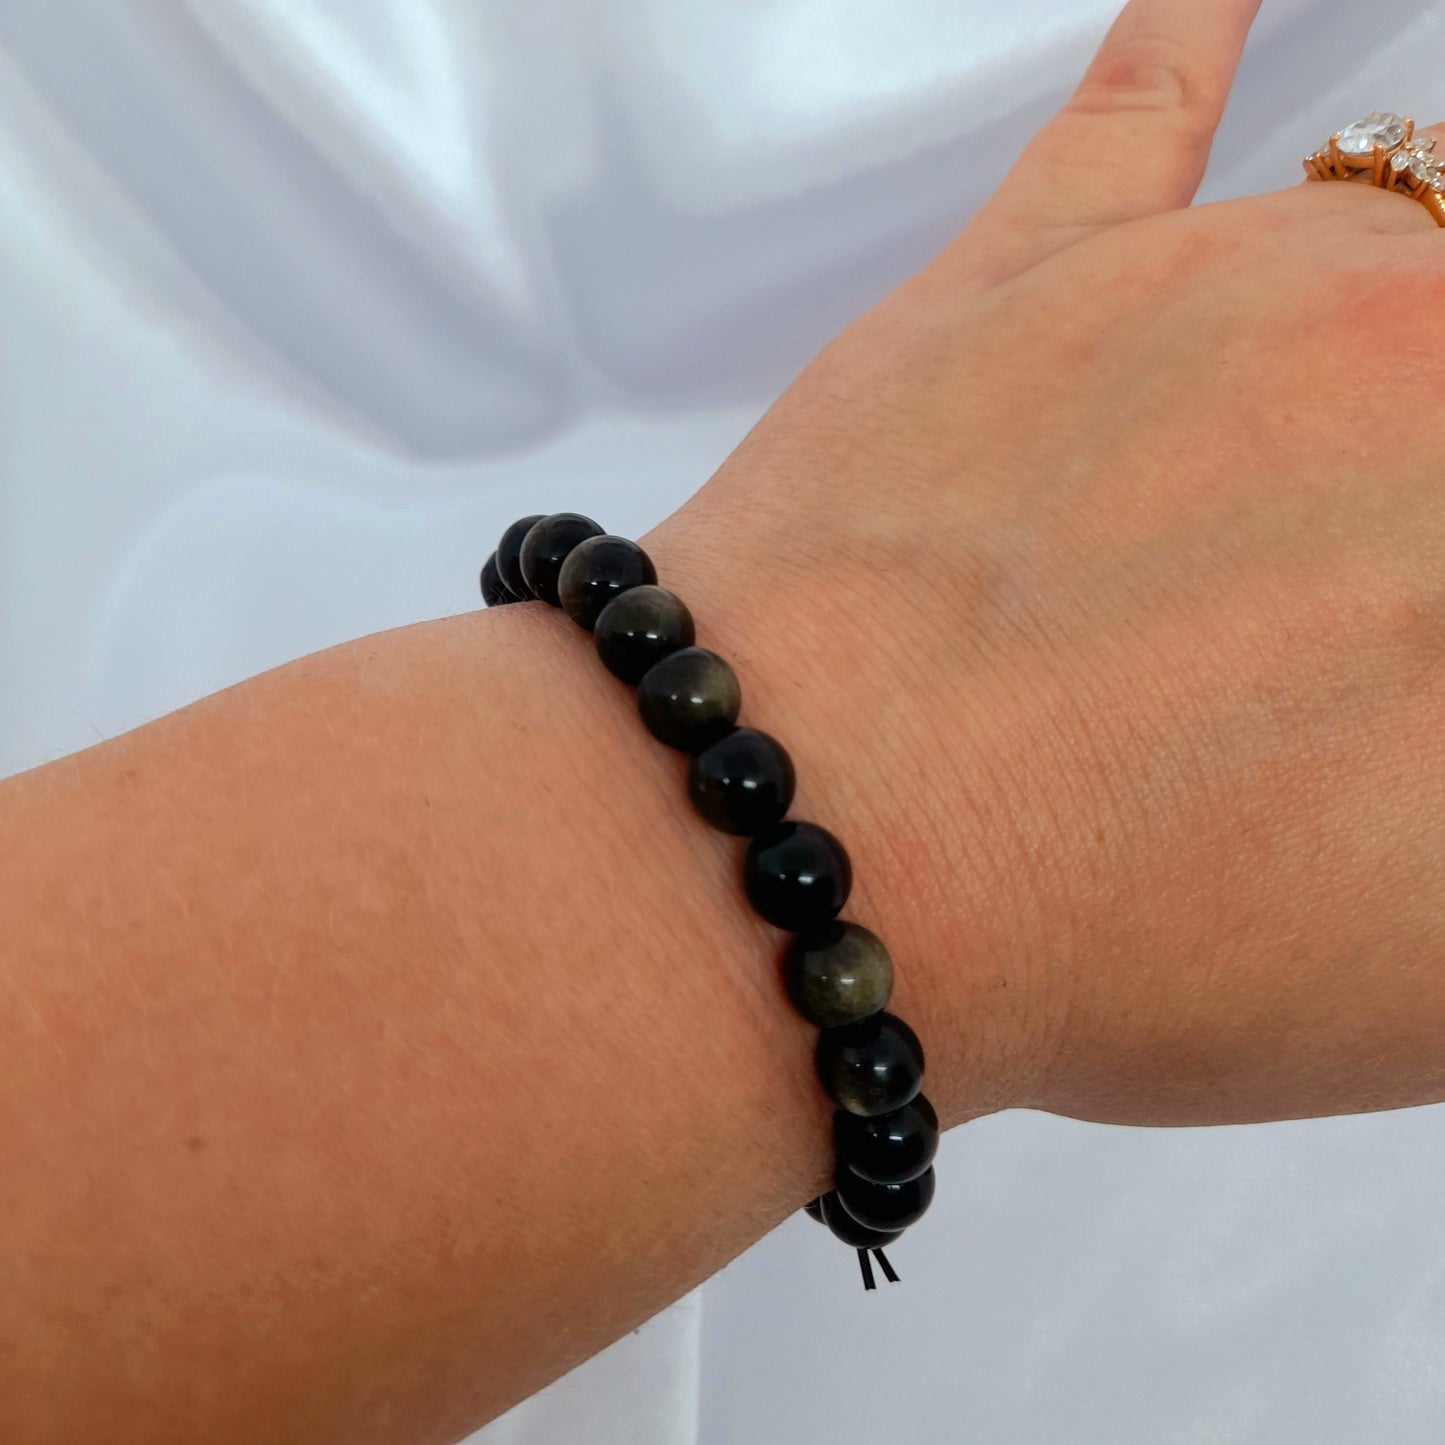 Gold Obsidian Crystal Bracelet: Experience the allure of this rare variation, known for purifying the Aura and addressing ego issues. Each bracelet is a unique creation with variations in tightness. Specify your size preference for a perfect fit. Carry the transformative energy and protective qualities of Gold Obsidian with you in style